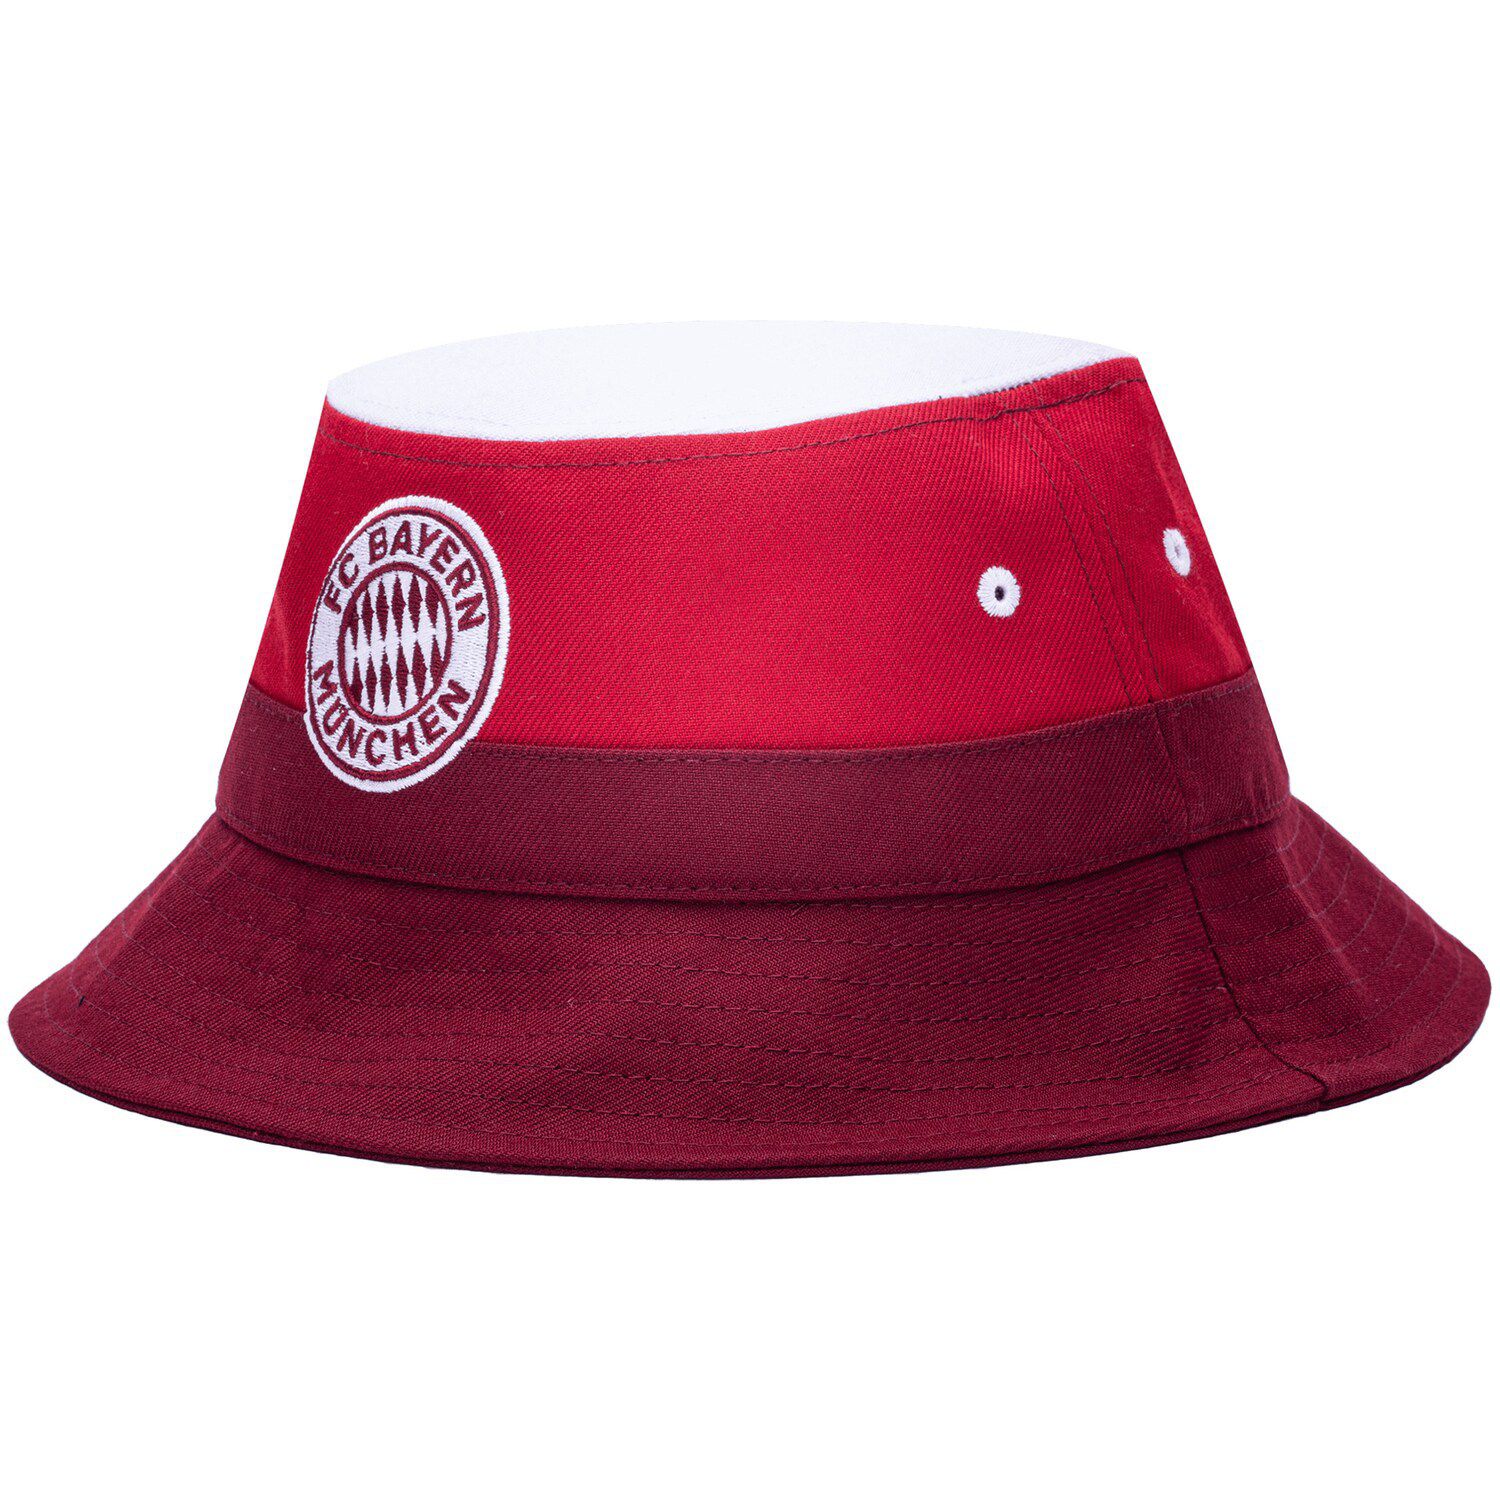 Image for Unbranded Men's Red Bayern Munich Truitt Bucket Hat at Kohl's.